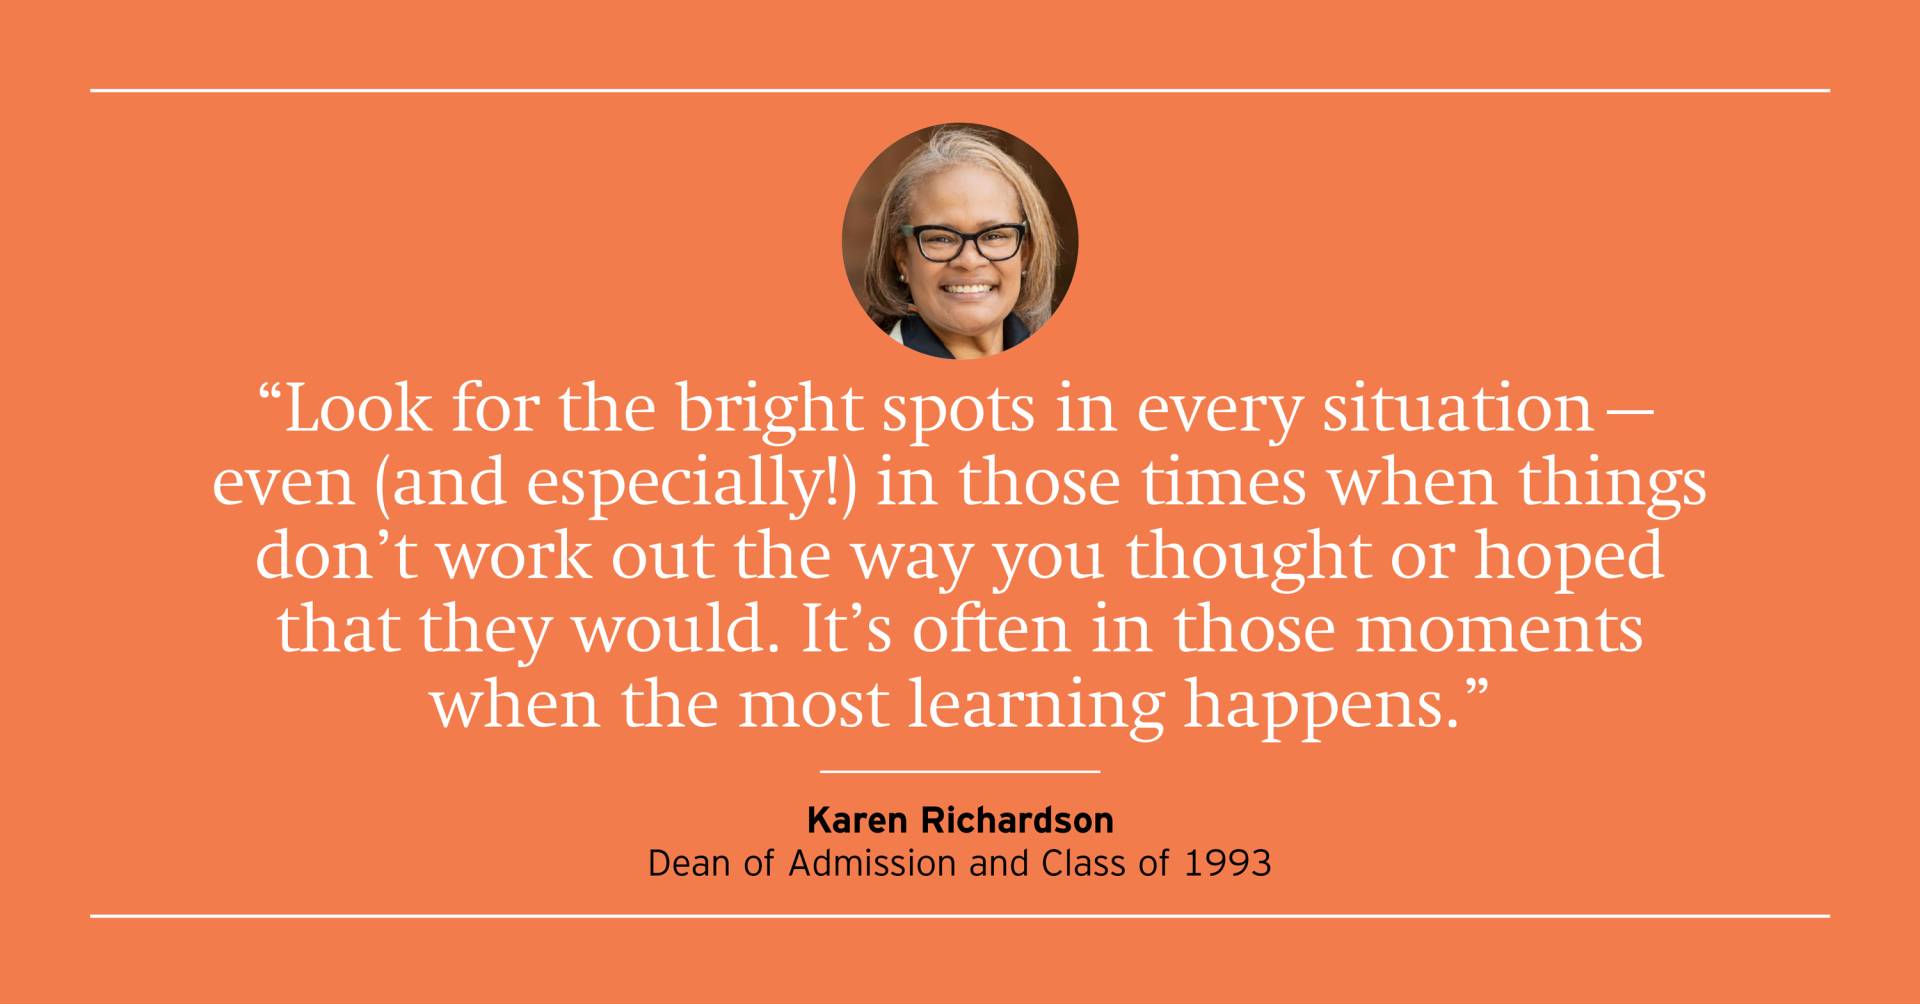 "Look for the bright spots in every situation -- even (and especially!) in those times when things don't work out the way you thought or hoped that they would. It's often in those moments when most of the learning happens." Karen Richardson, Dean of Admission and Class of 1993